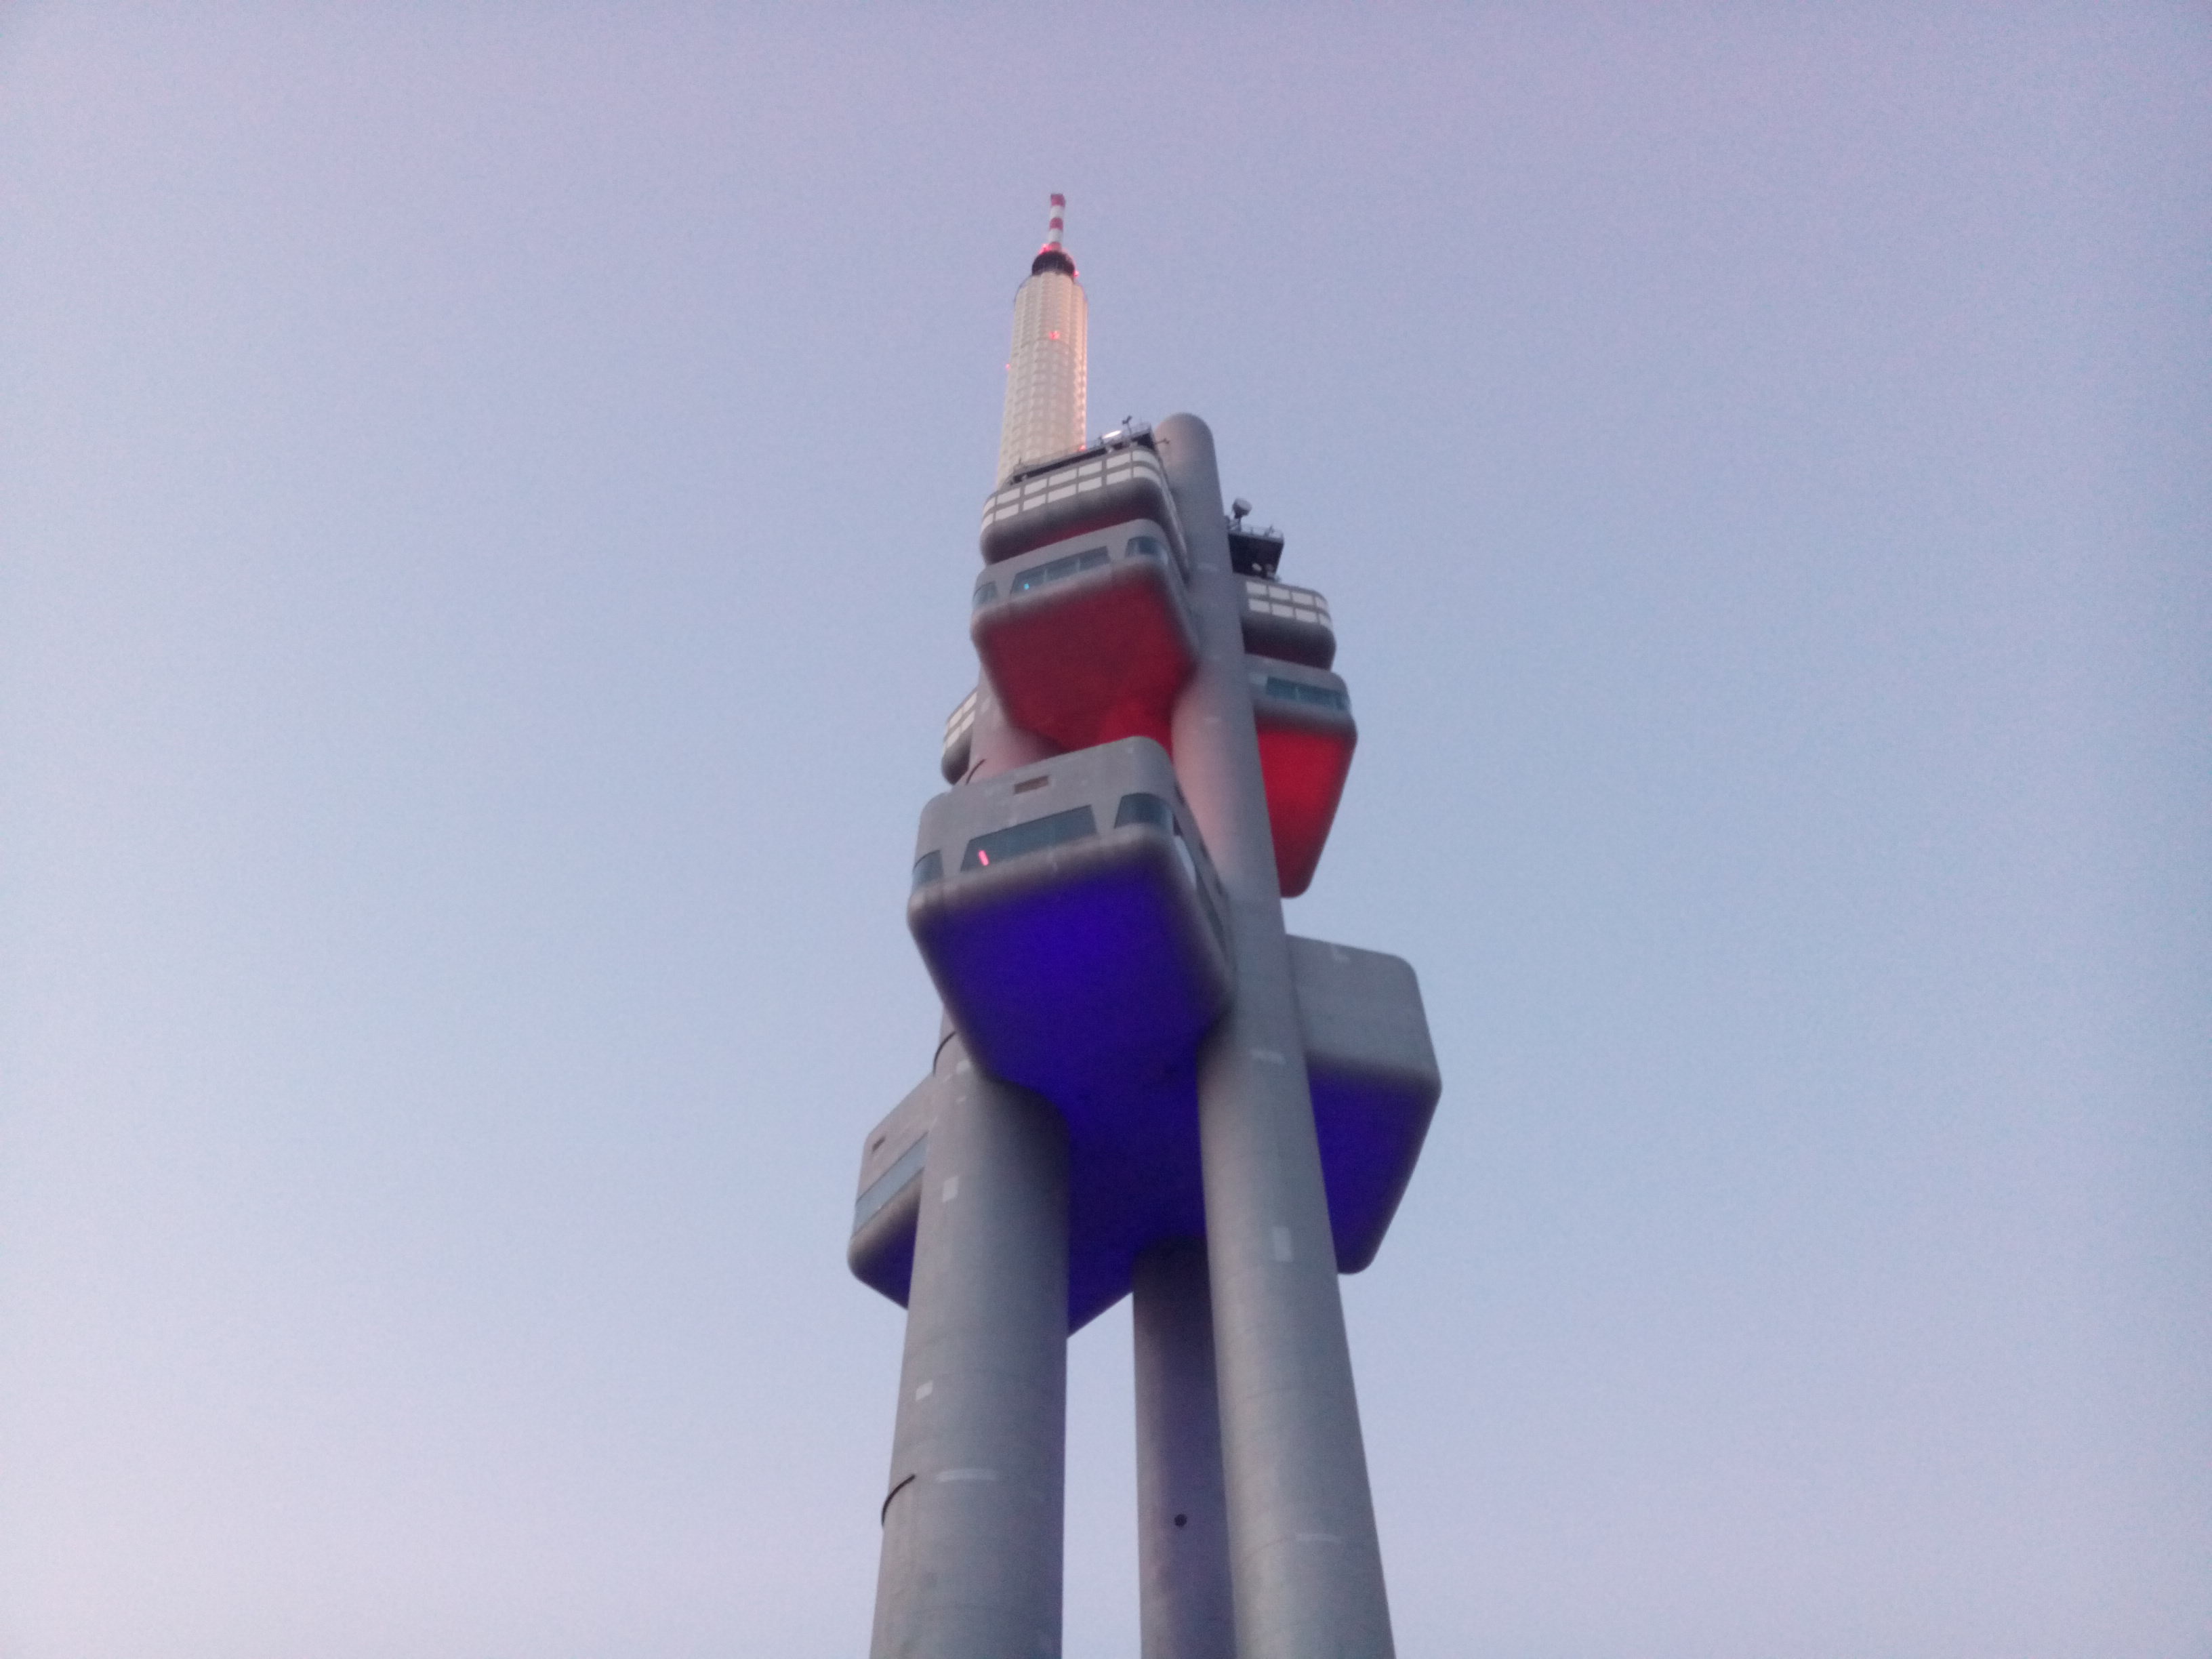 A white and red space-age looking tower against a pale blue evening sky